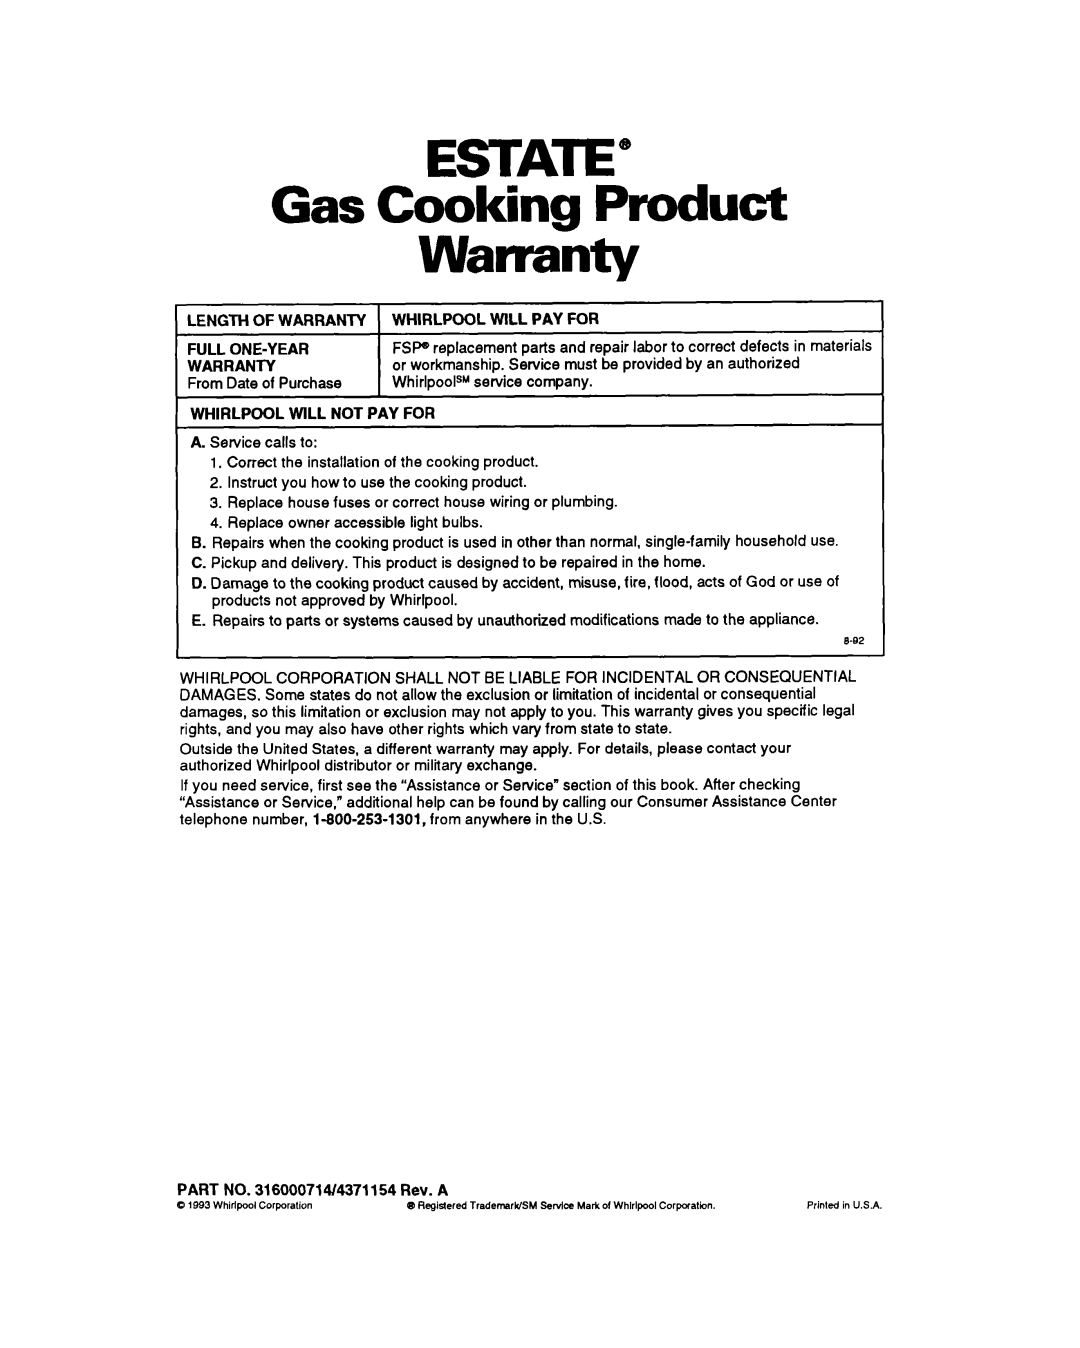 Whirlpool TGR51 warranty Gas Cooking Product Warranty, Estate”, Length Of Warranty Whirlpool Will Pay For, Full One-Year 